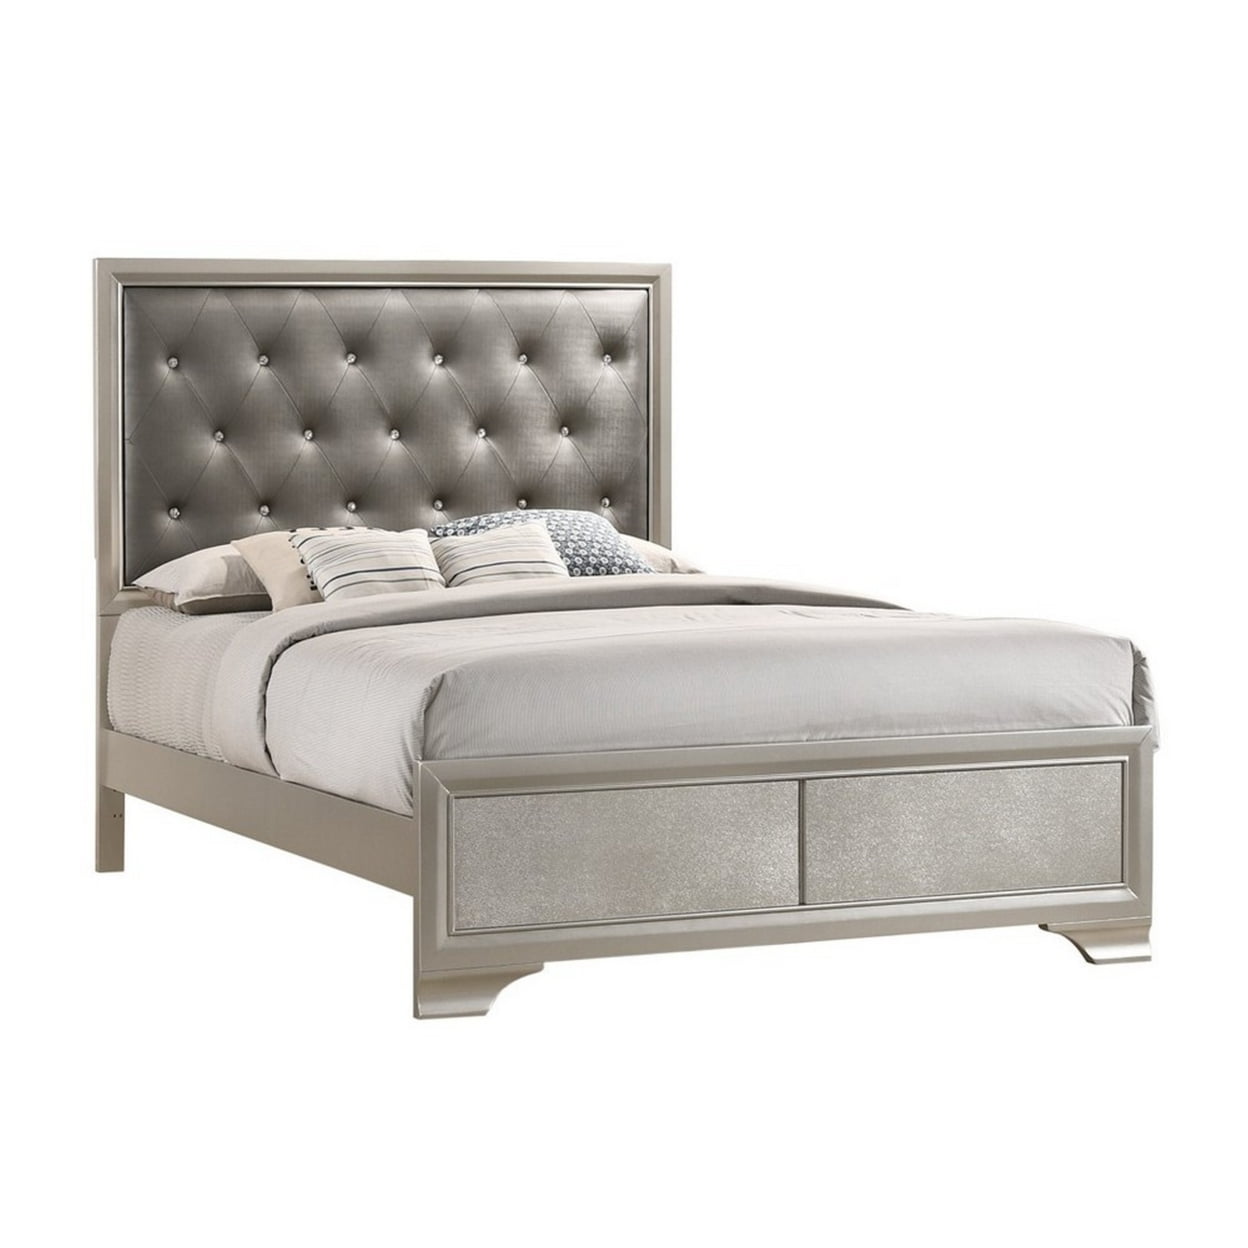 BM215530 Padded Leatherette Queen Size Bed with Diamond Tufting, Silver & Gray -  Benjara